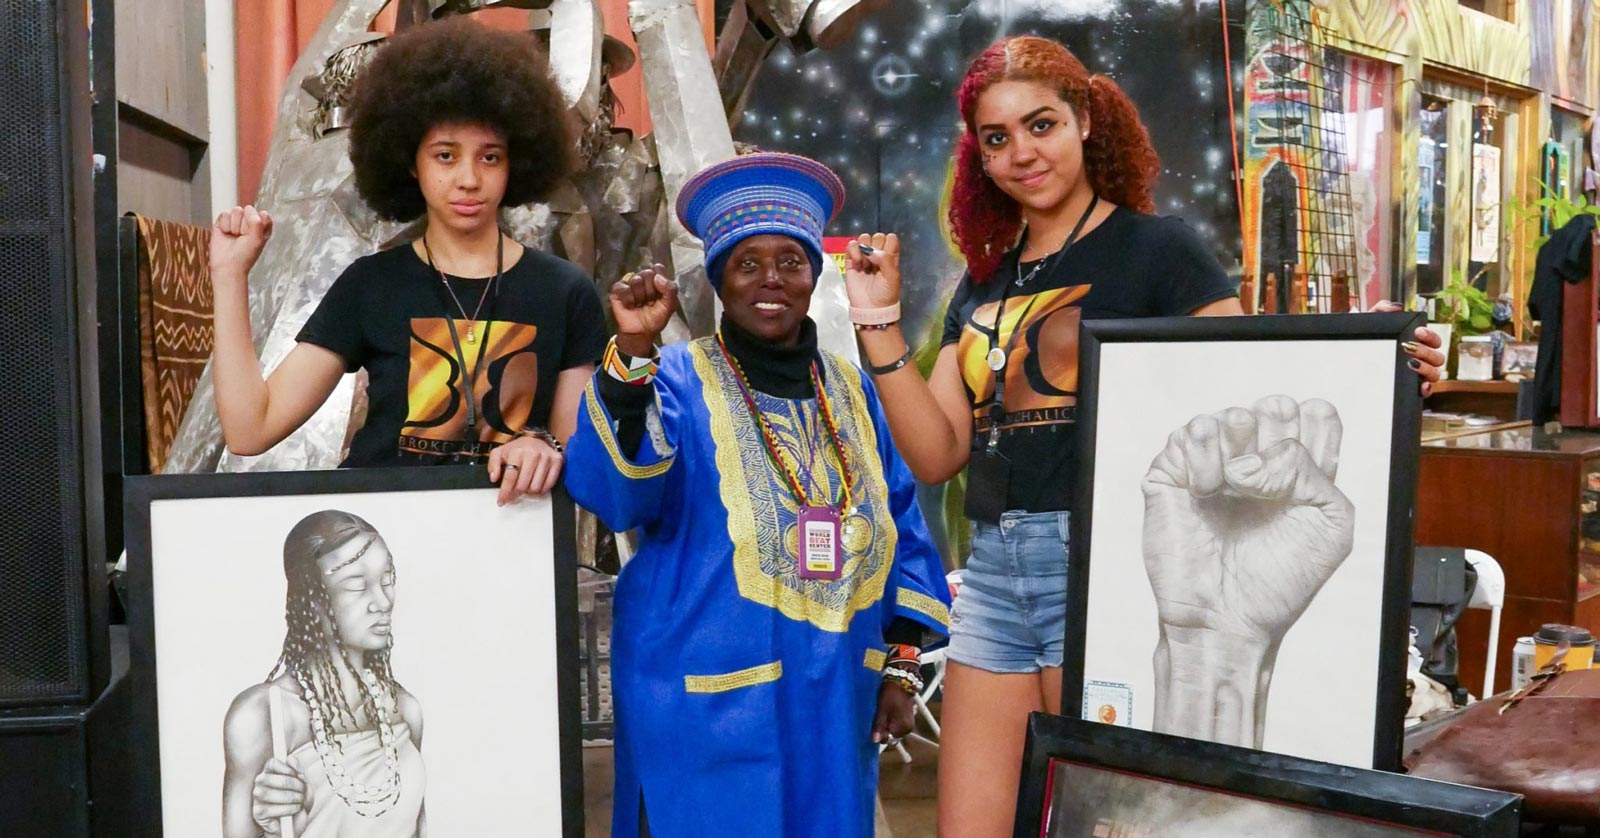 Black Comix Day at World Beat Center is part of San Diego's Black History Month celebrations